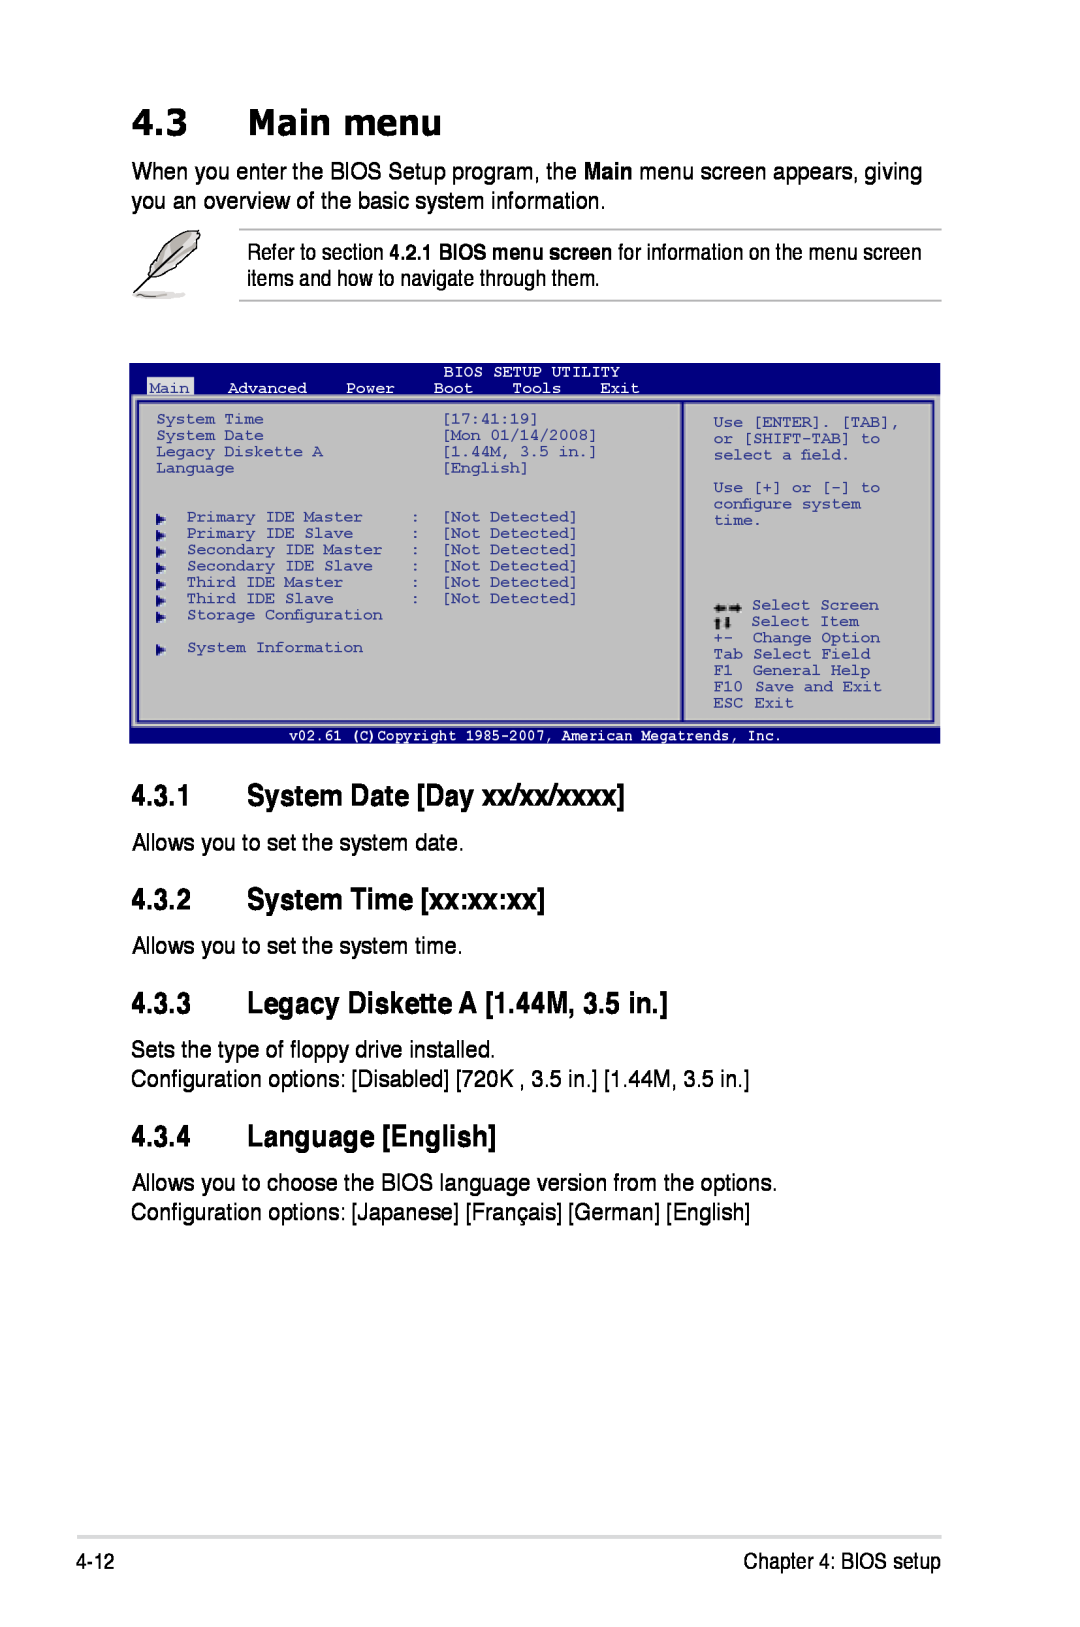 Asus Z7S WS manual Main menu, System Date Day xx/xx/xxxx, System Time, Legacy Diskette A 1.44M, 3.5 in, Language English 